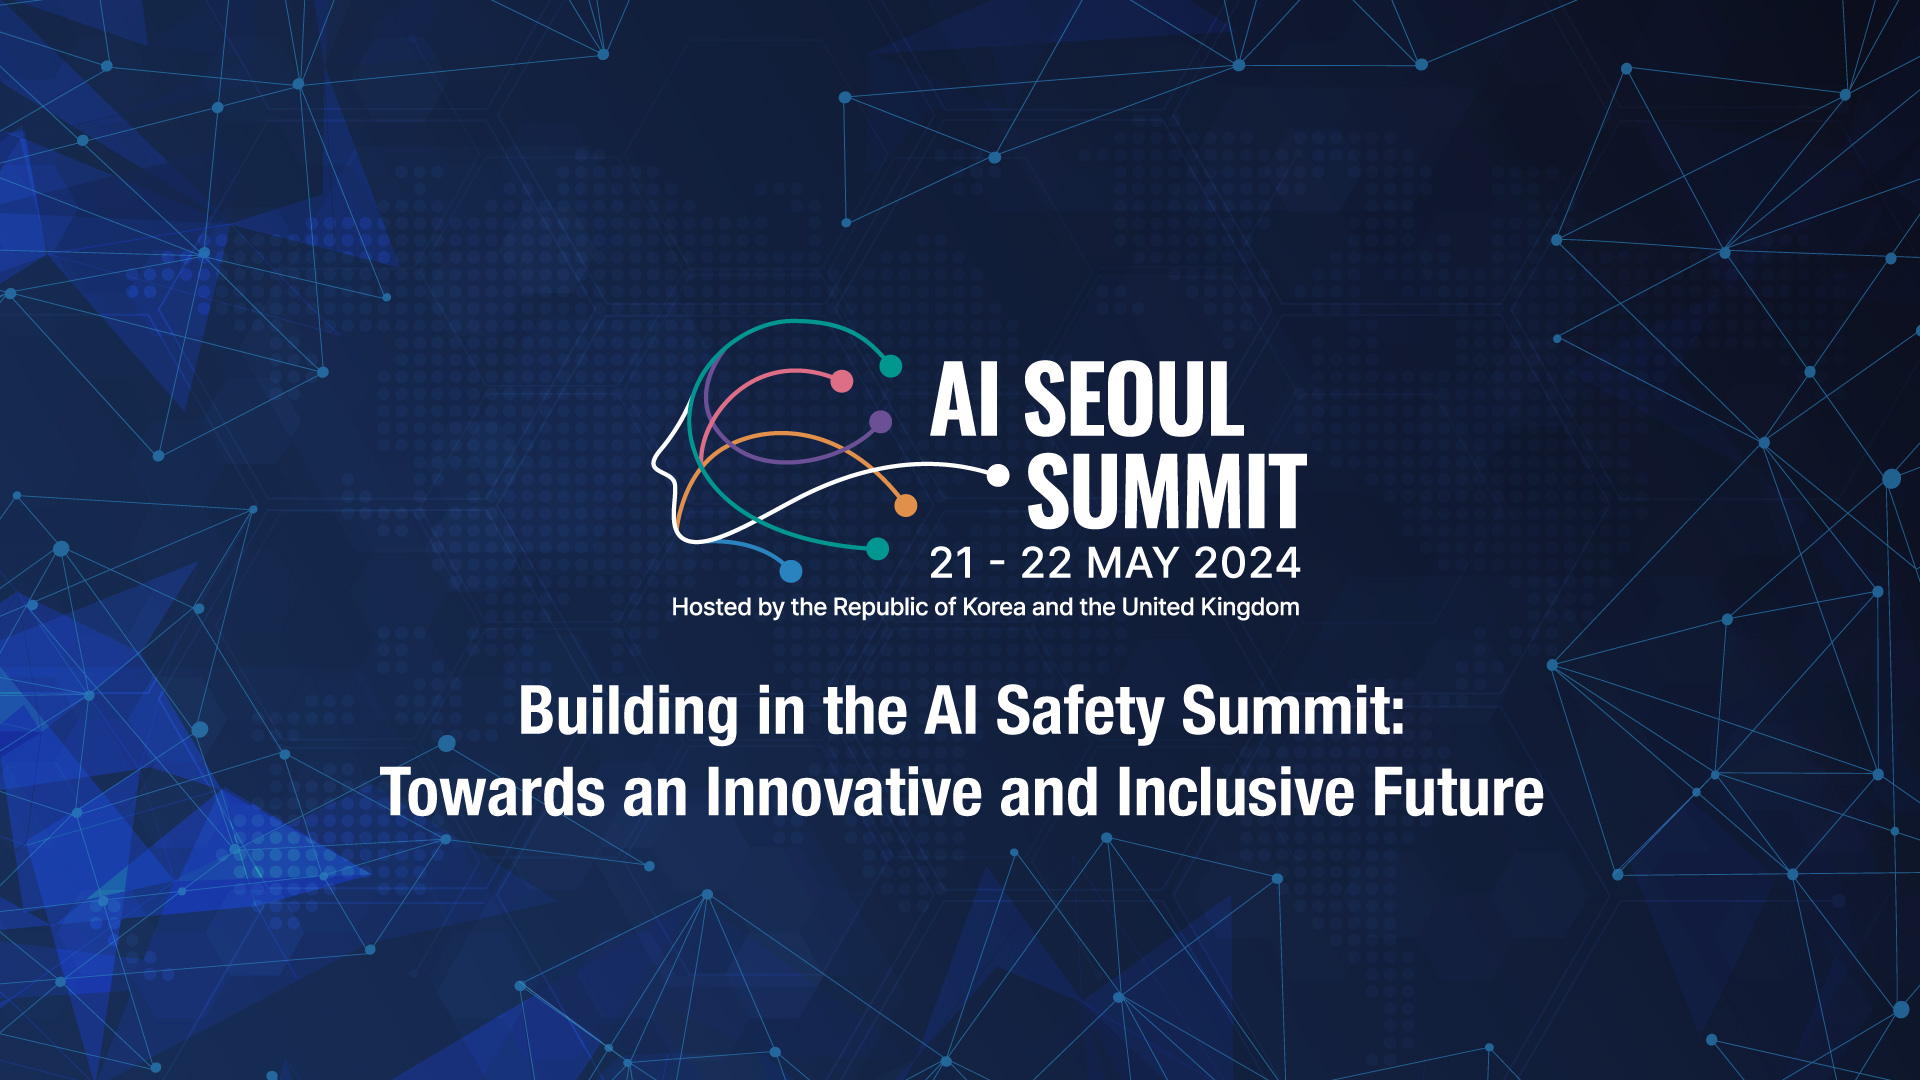 Event Overview:  * Event Name: AI Seoul Summit * D